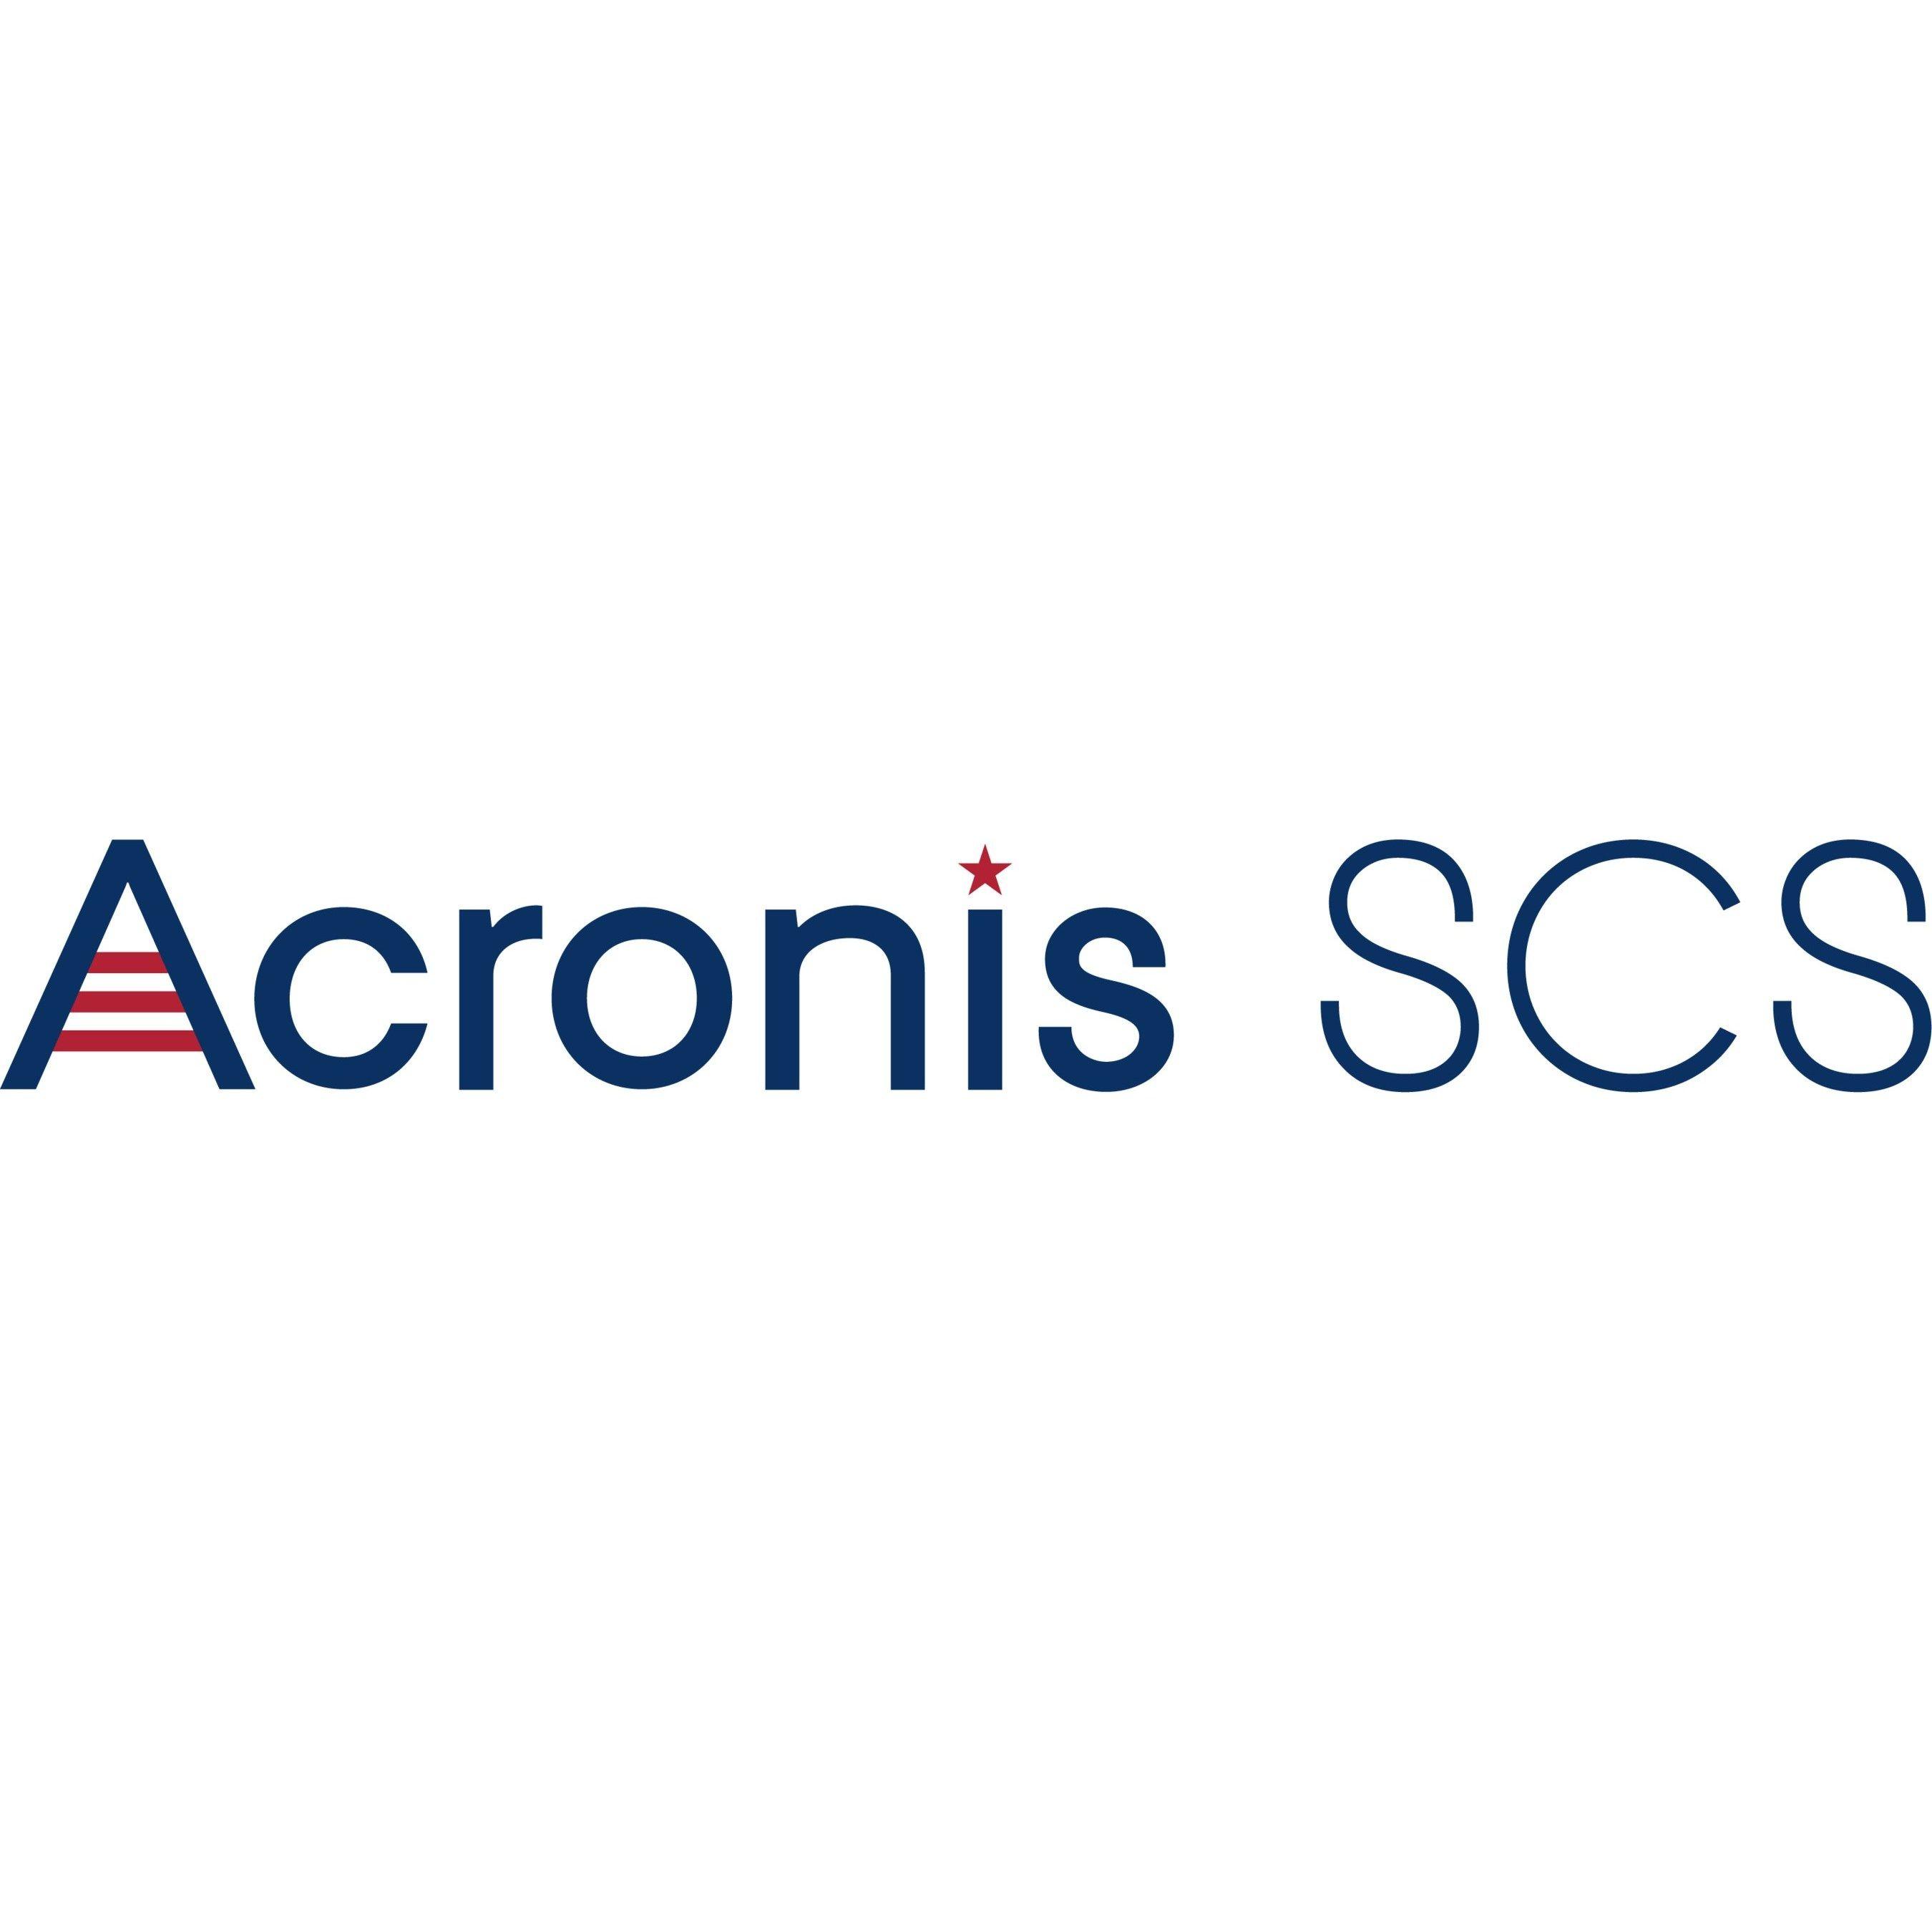 Aronis Logo - Acronis SCS: A New Company Solely Dedicated to Securing the U.S. ...